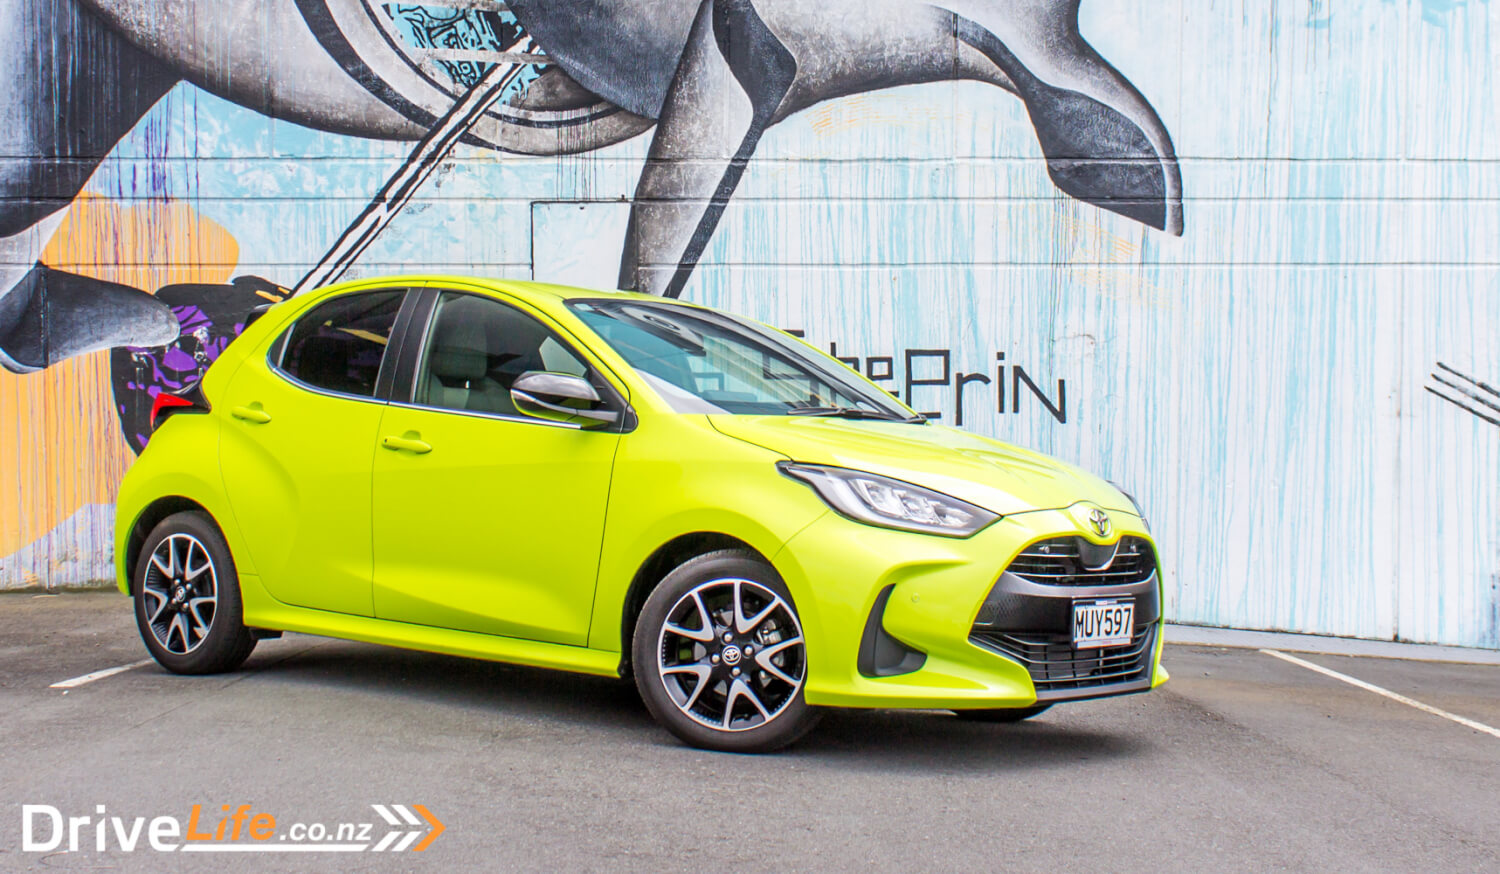 2020 Toyota Yaris Zr Hatch Car Review Drivelife